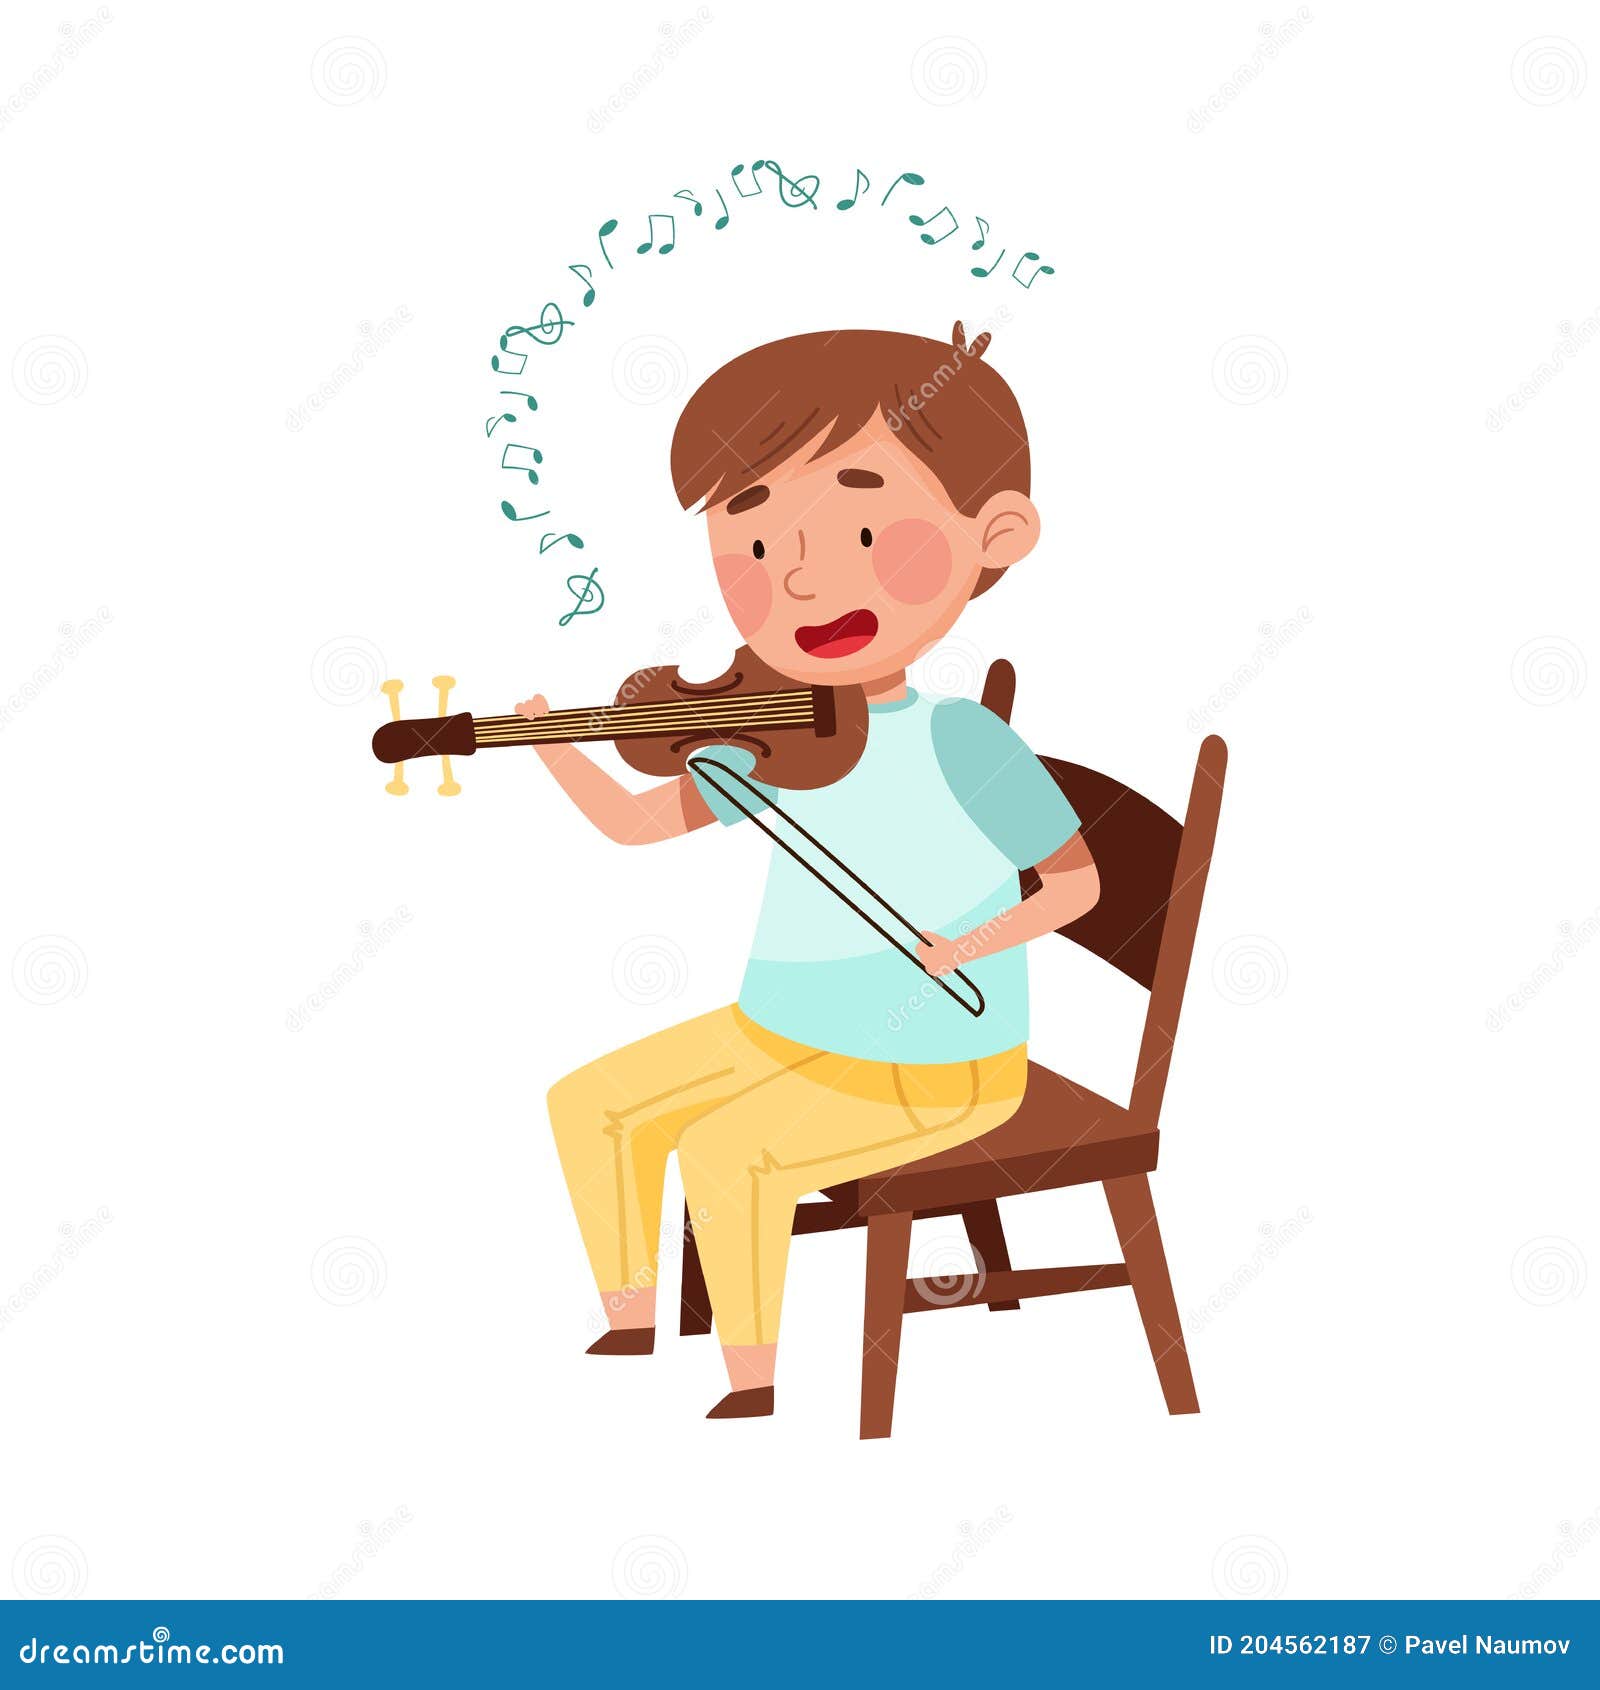 Funny Boy Character Sitting on Chair and Playing Violin at Music Lesson  Vector Illustration Stock Vector - Illustration of hobby, composing:  204562187